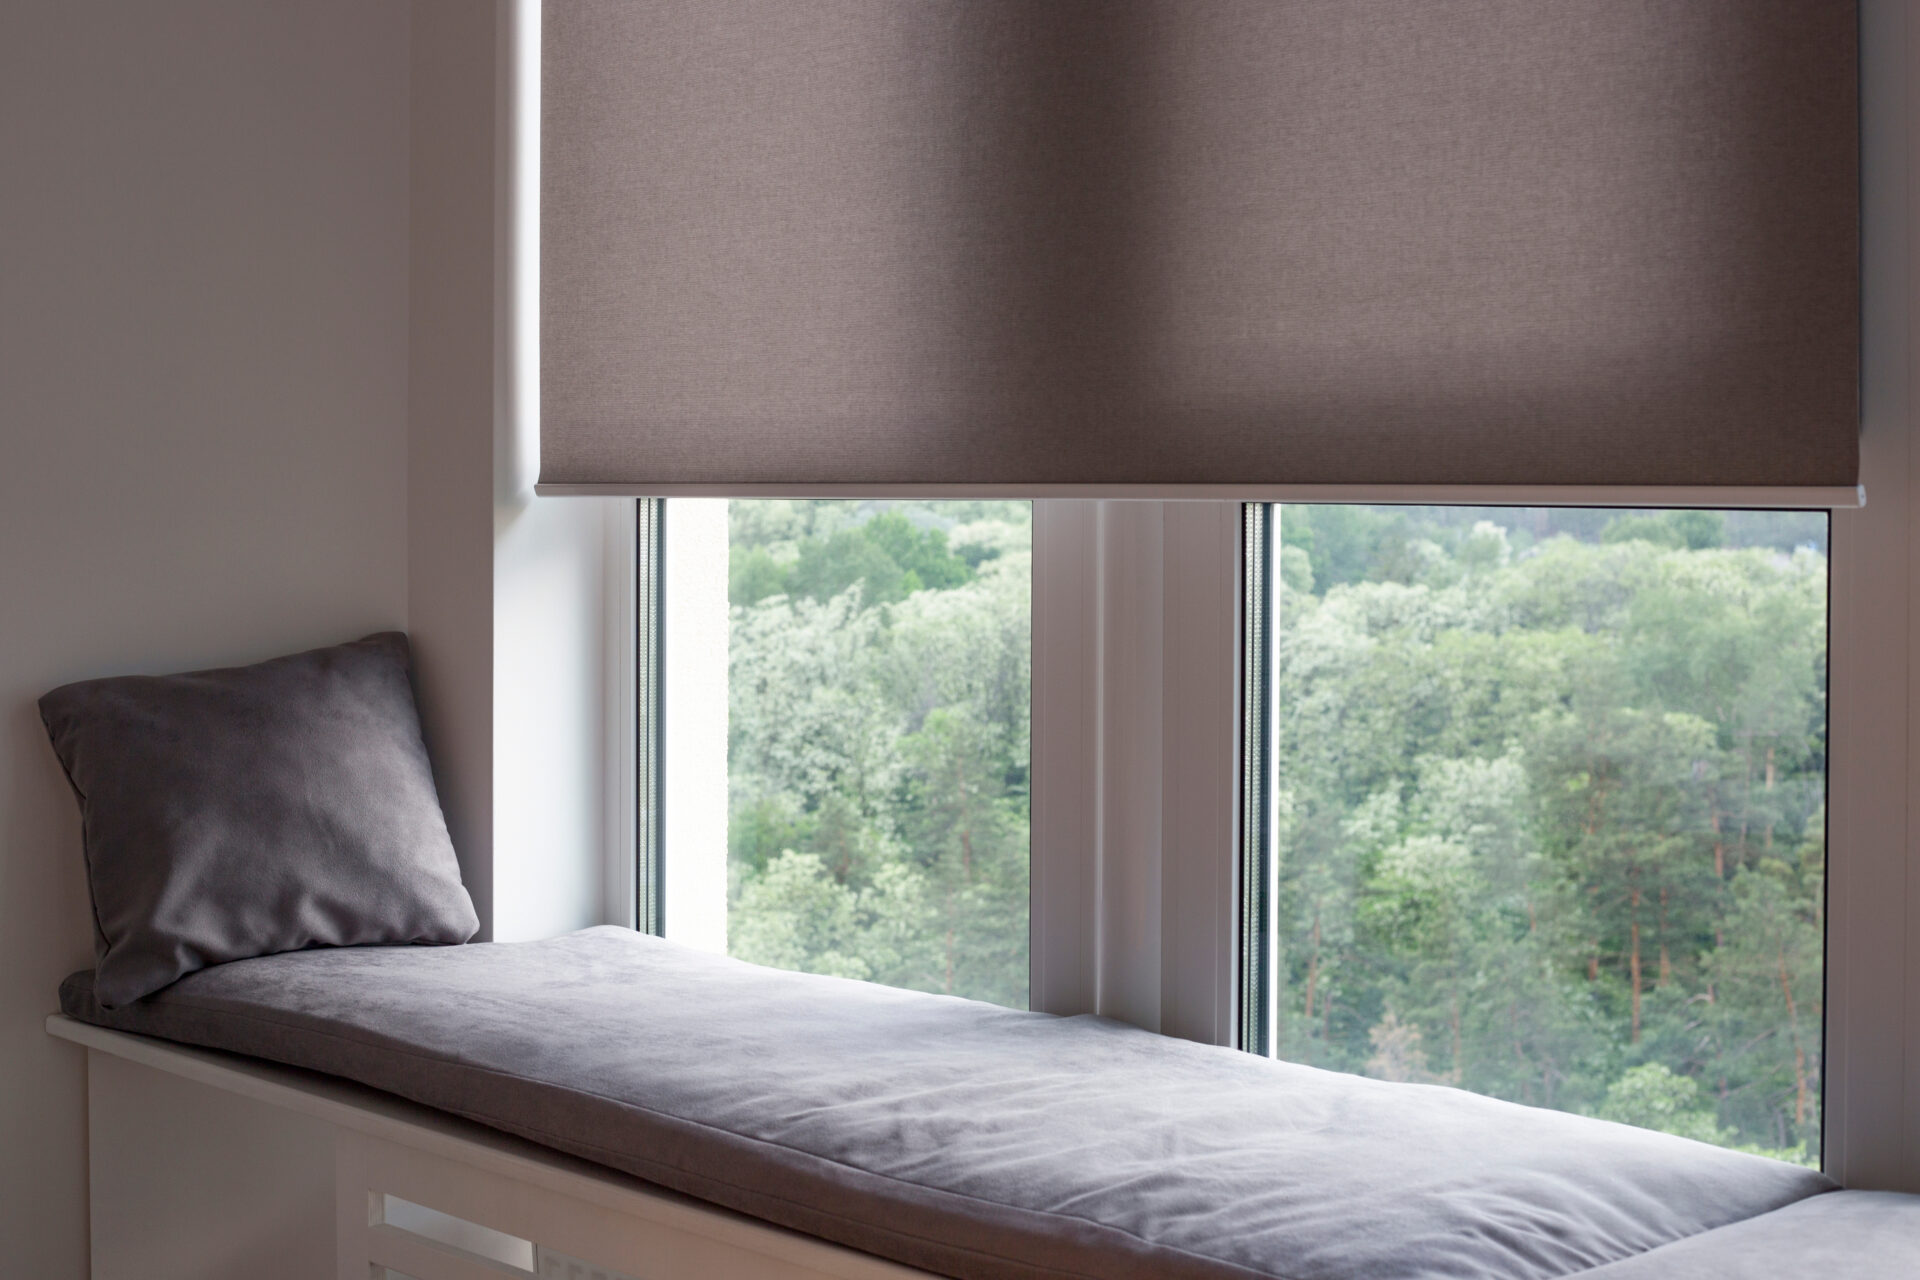 Beige roller shades on large windows in living room. Find shades at Wholesale Blind Factory.